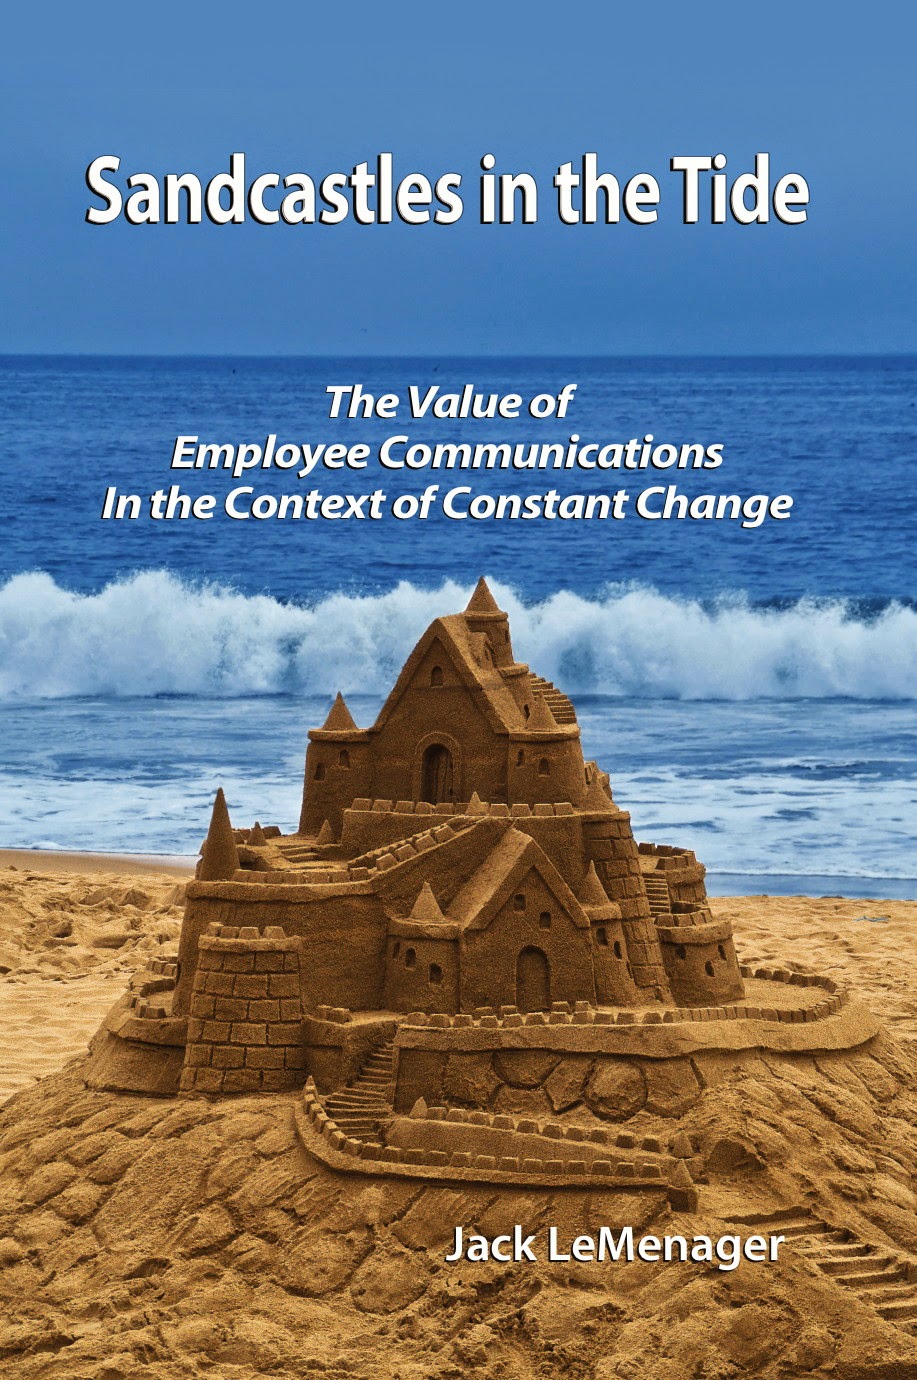 Sandcastles in the Tide: The Value of Employee Communications In the Context of Change